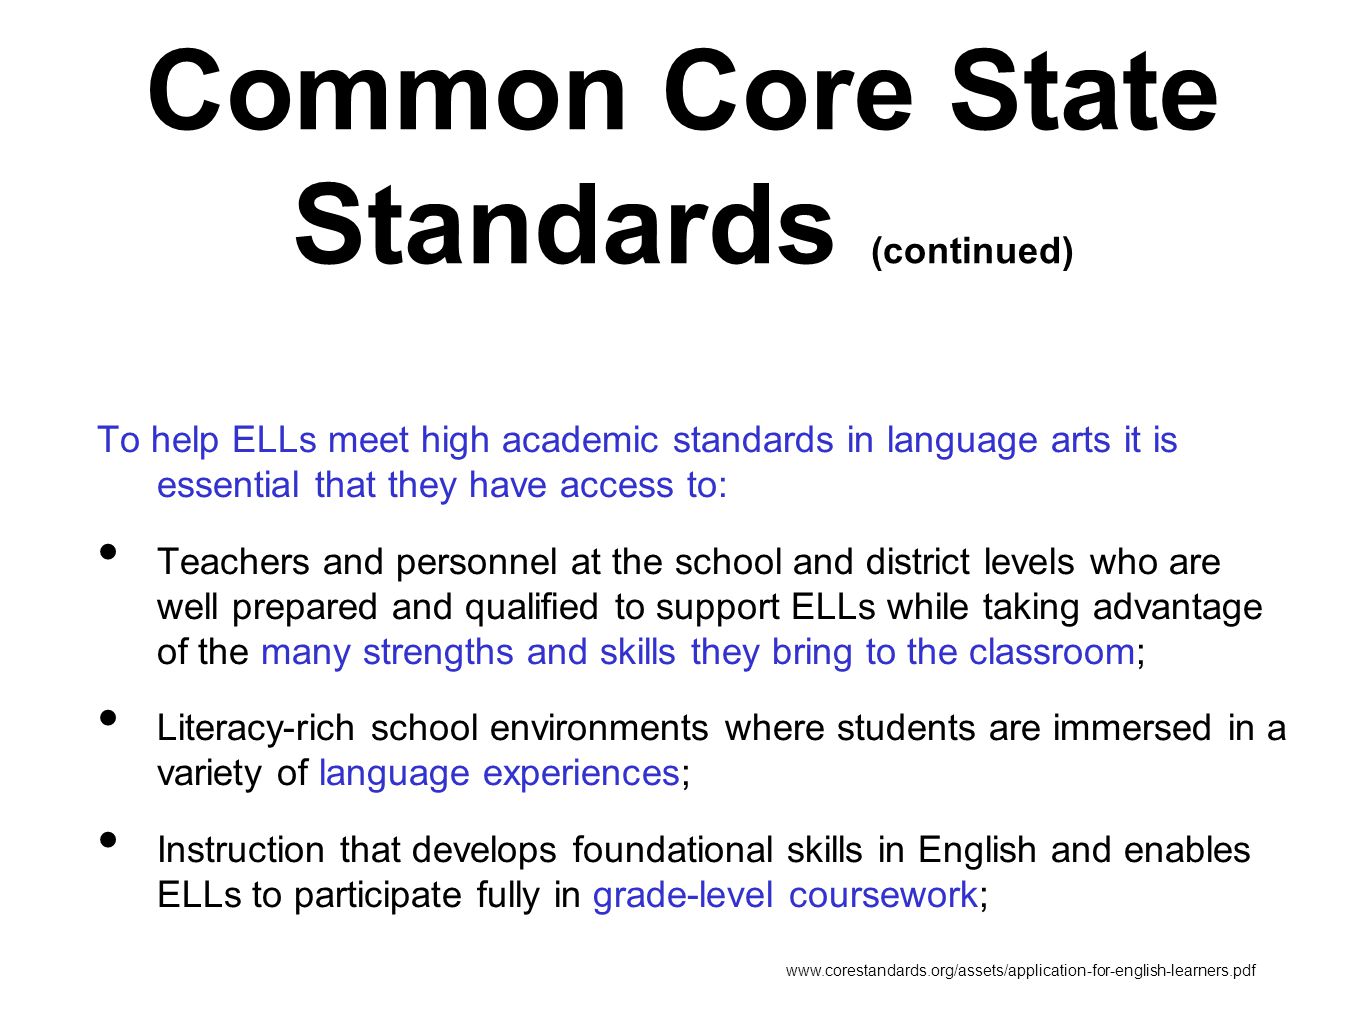 Common Core State Standards (continued)